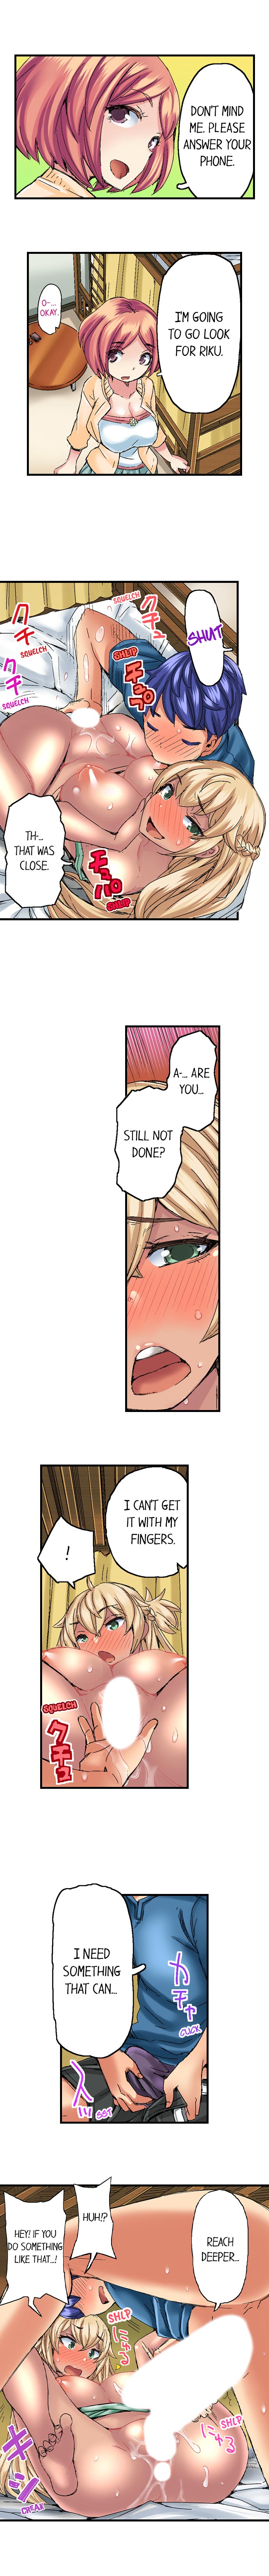 Taking a Hot Tanned Chick’s Virginity - Chapter 20 Page 9